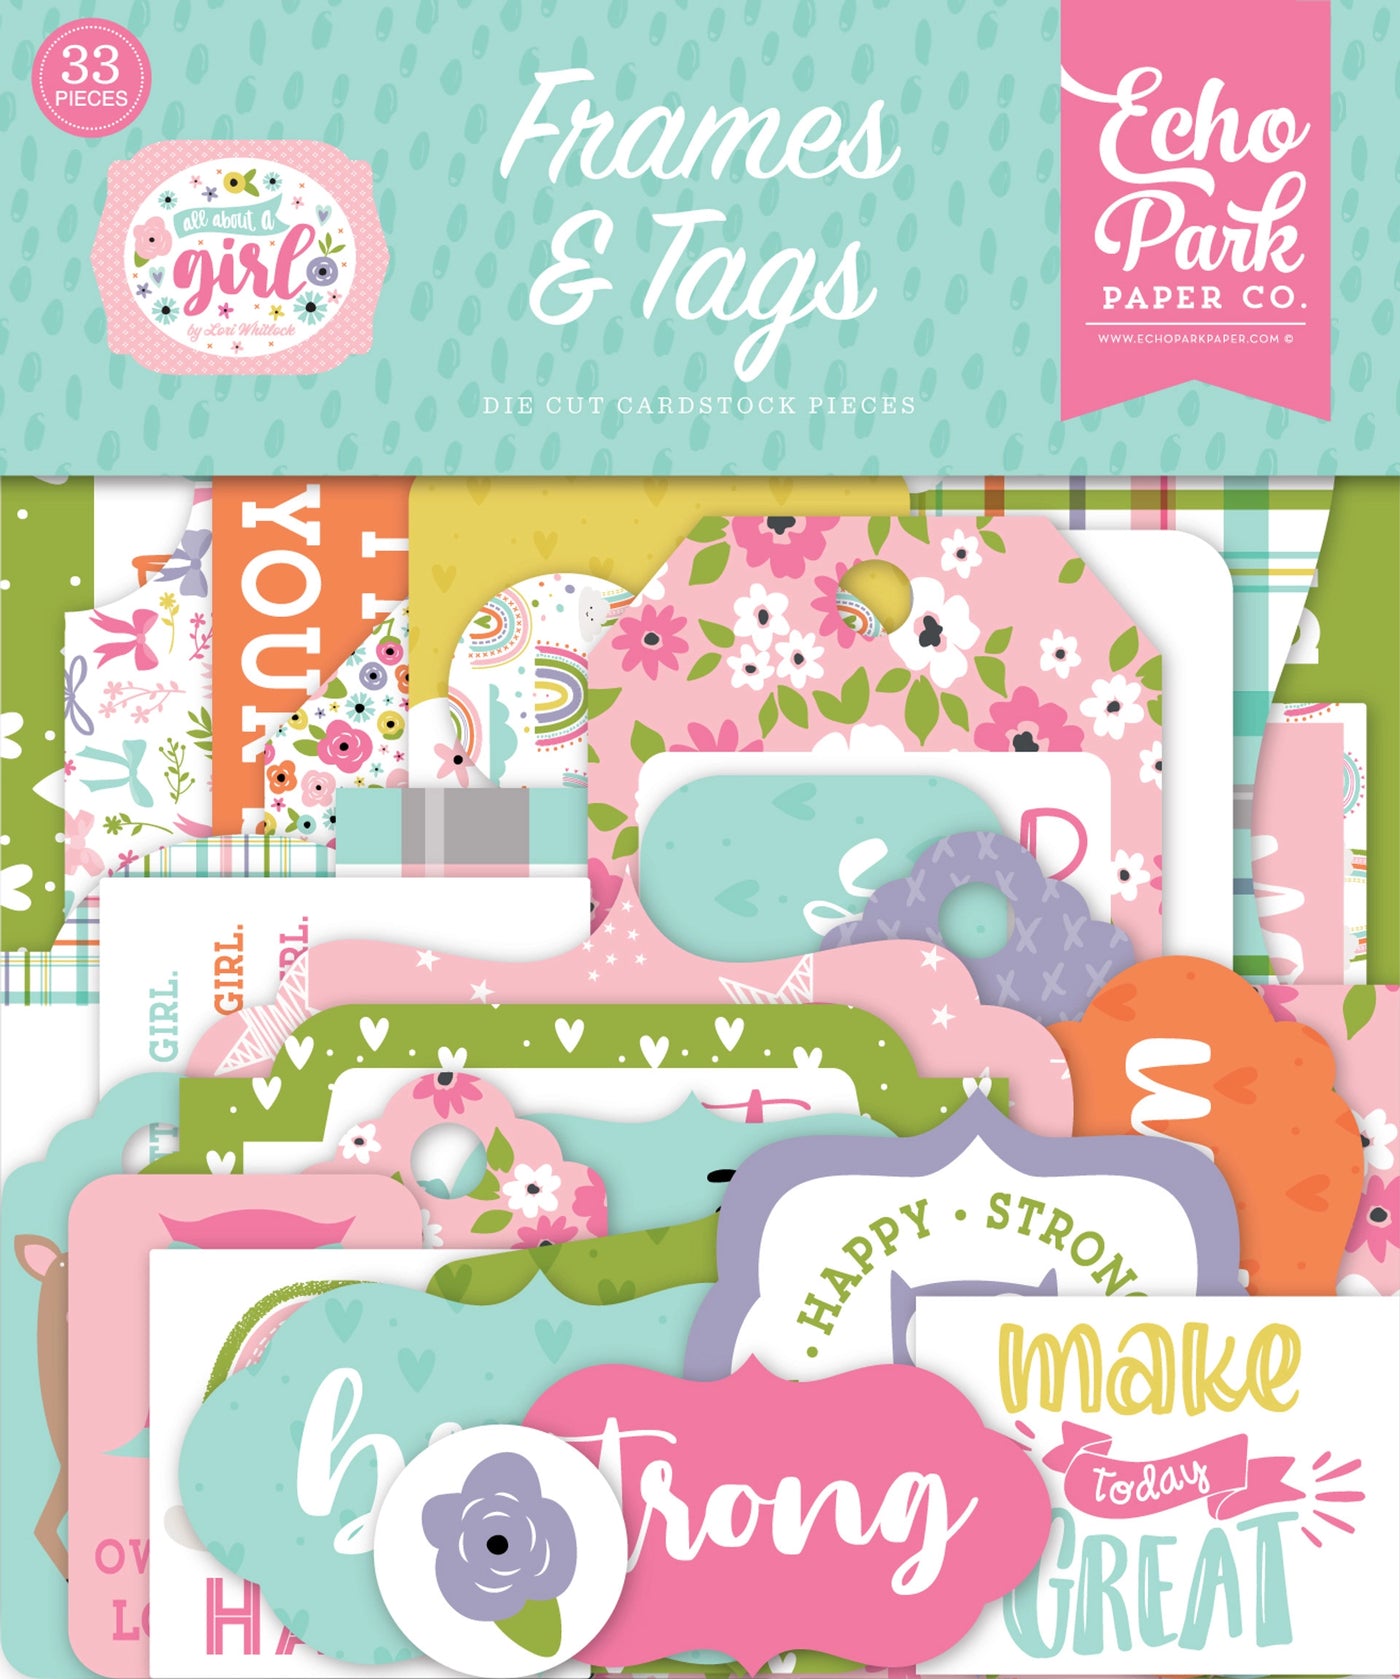 All About a Girl Frames & Tags Die Cut Cardstock. Pack includes 33 different die-cut shapes ready to embellish any project.